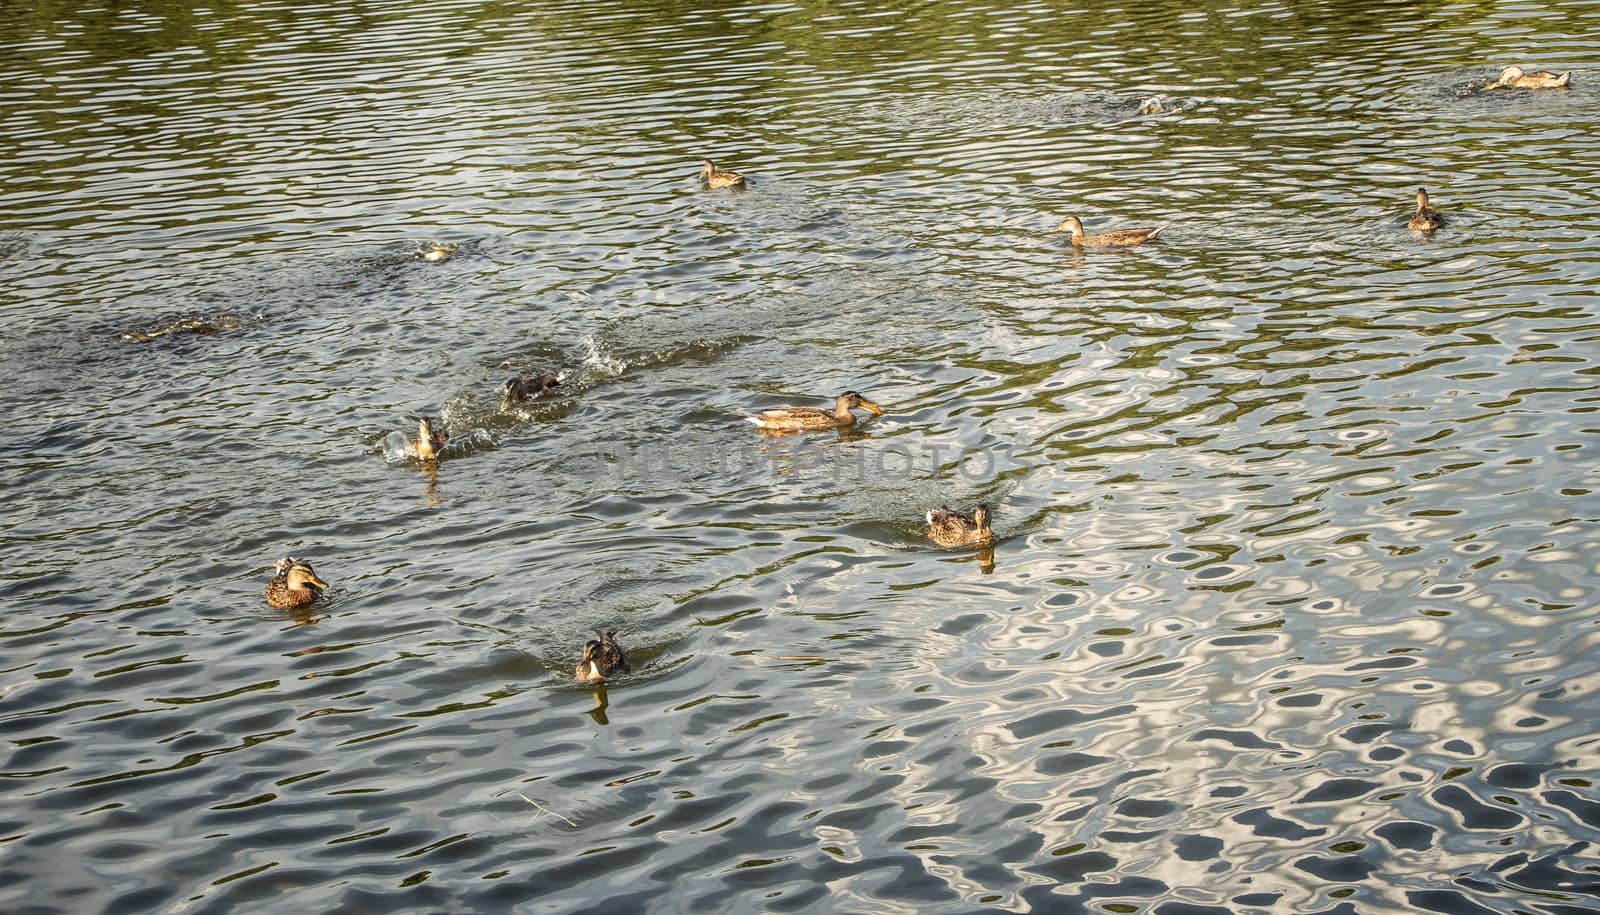 A group of ducks swimming in the lake.